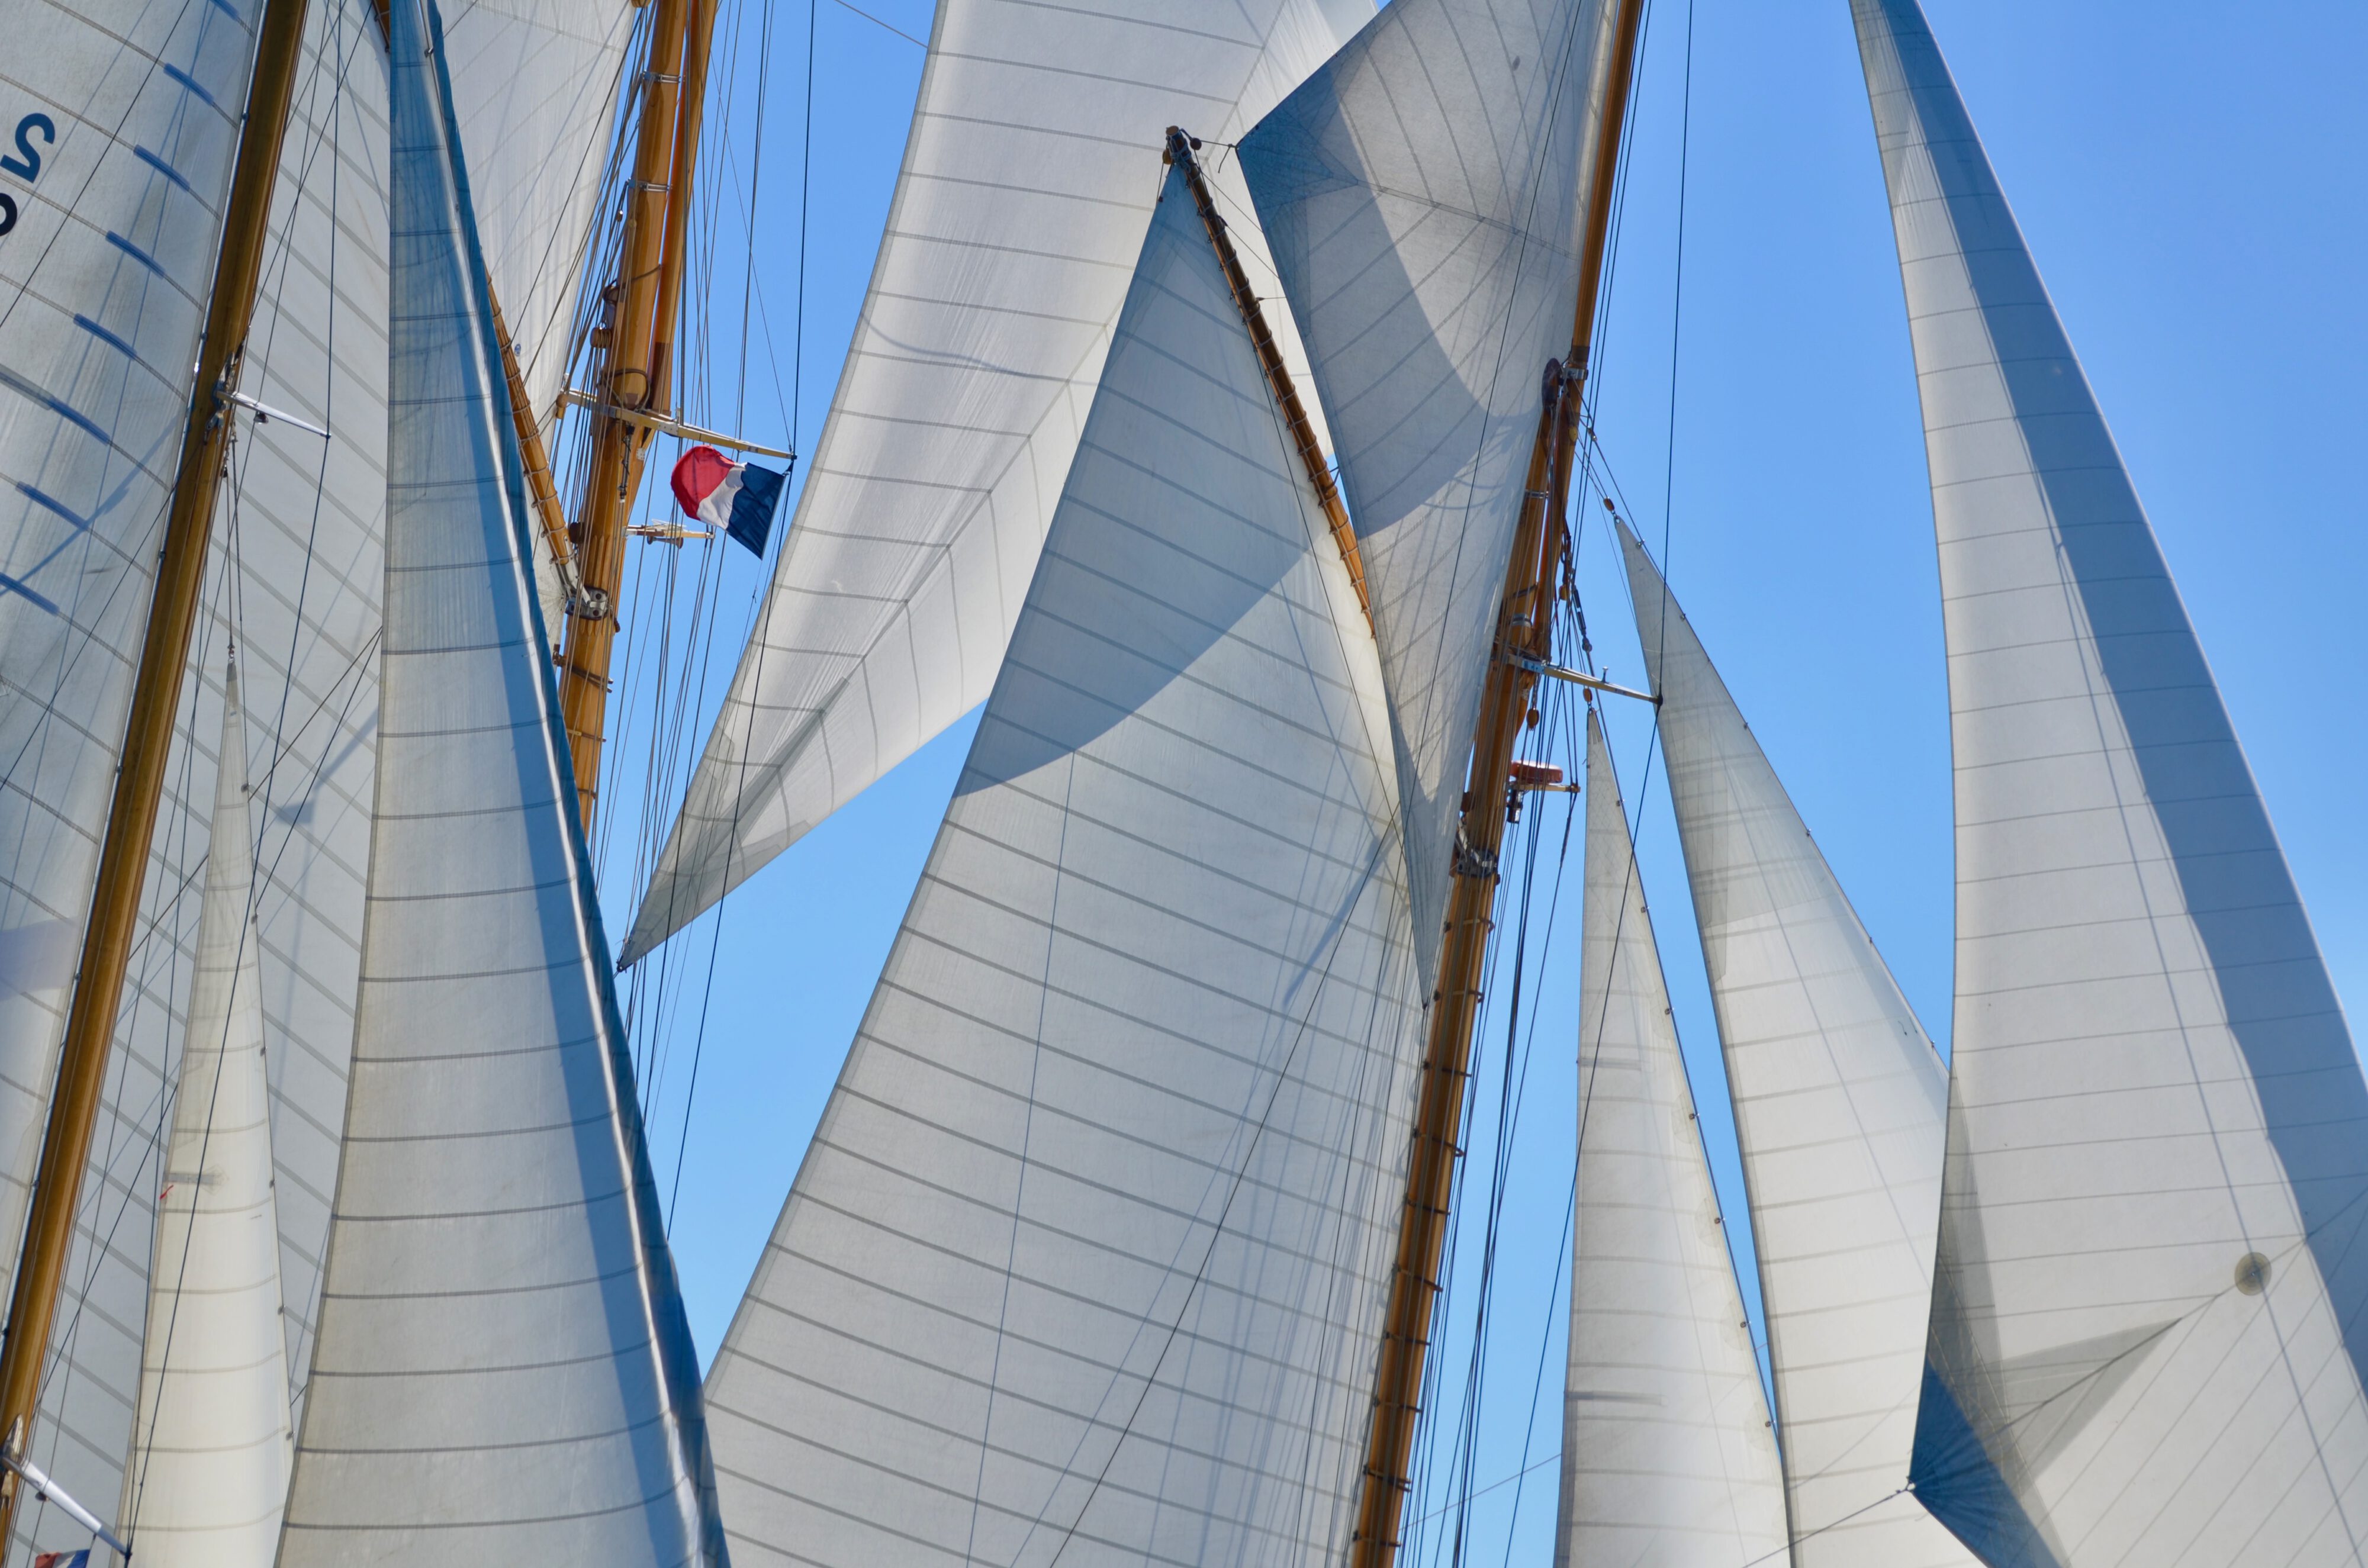 Regates Royales Panerai Classic Yacht Challenge in Cannes 2015